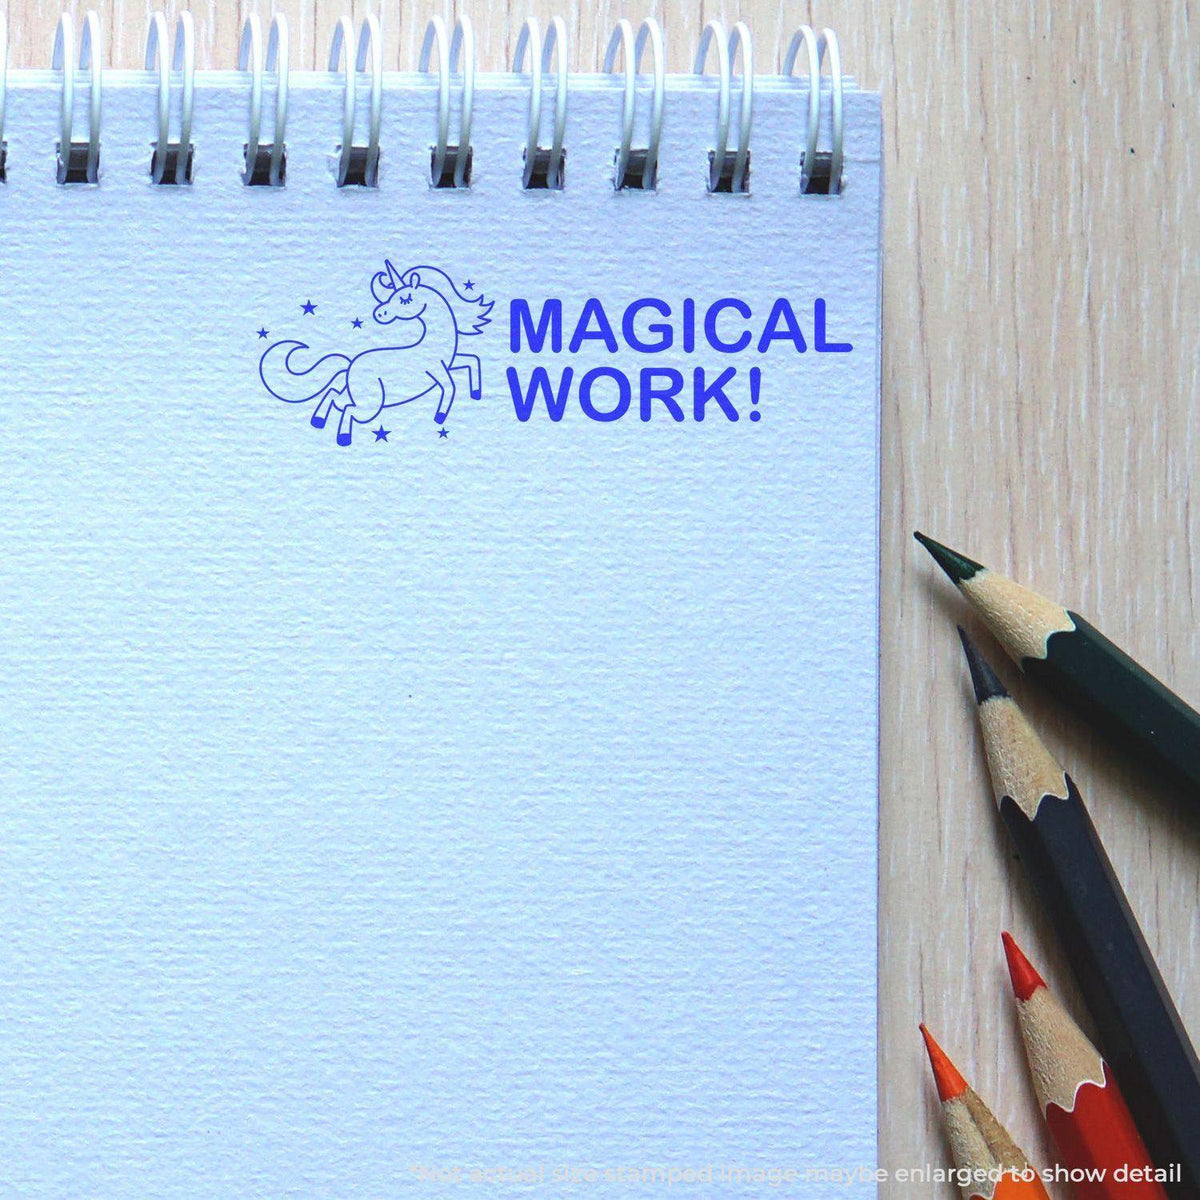 In Use Large Pre-Inked Magical Work Stamp Image